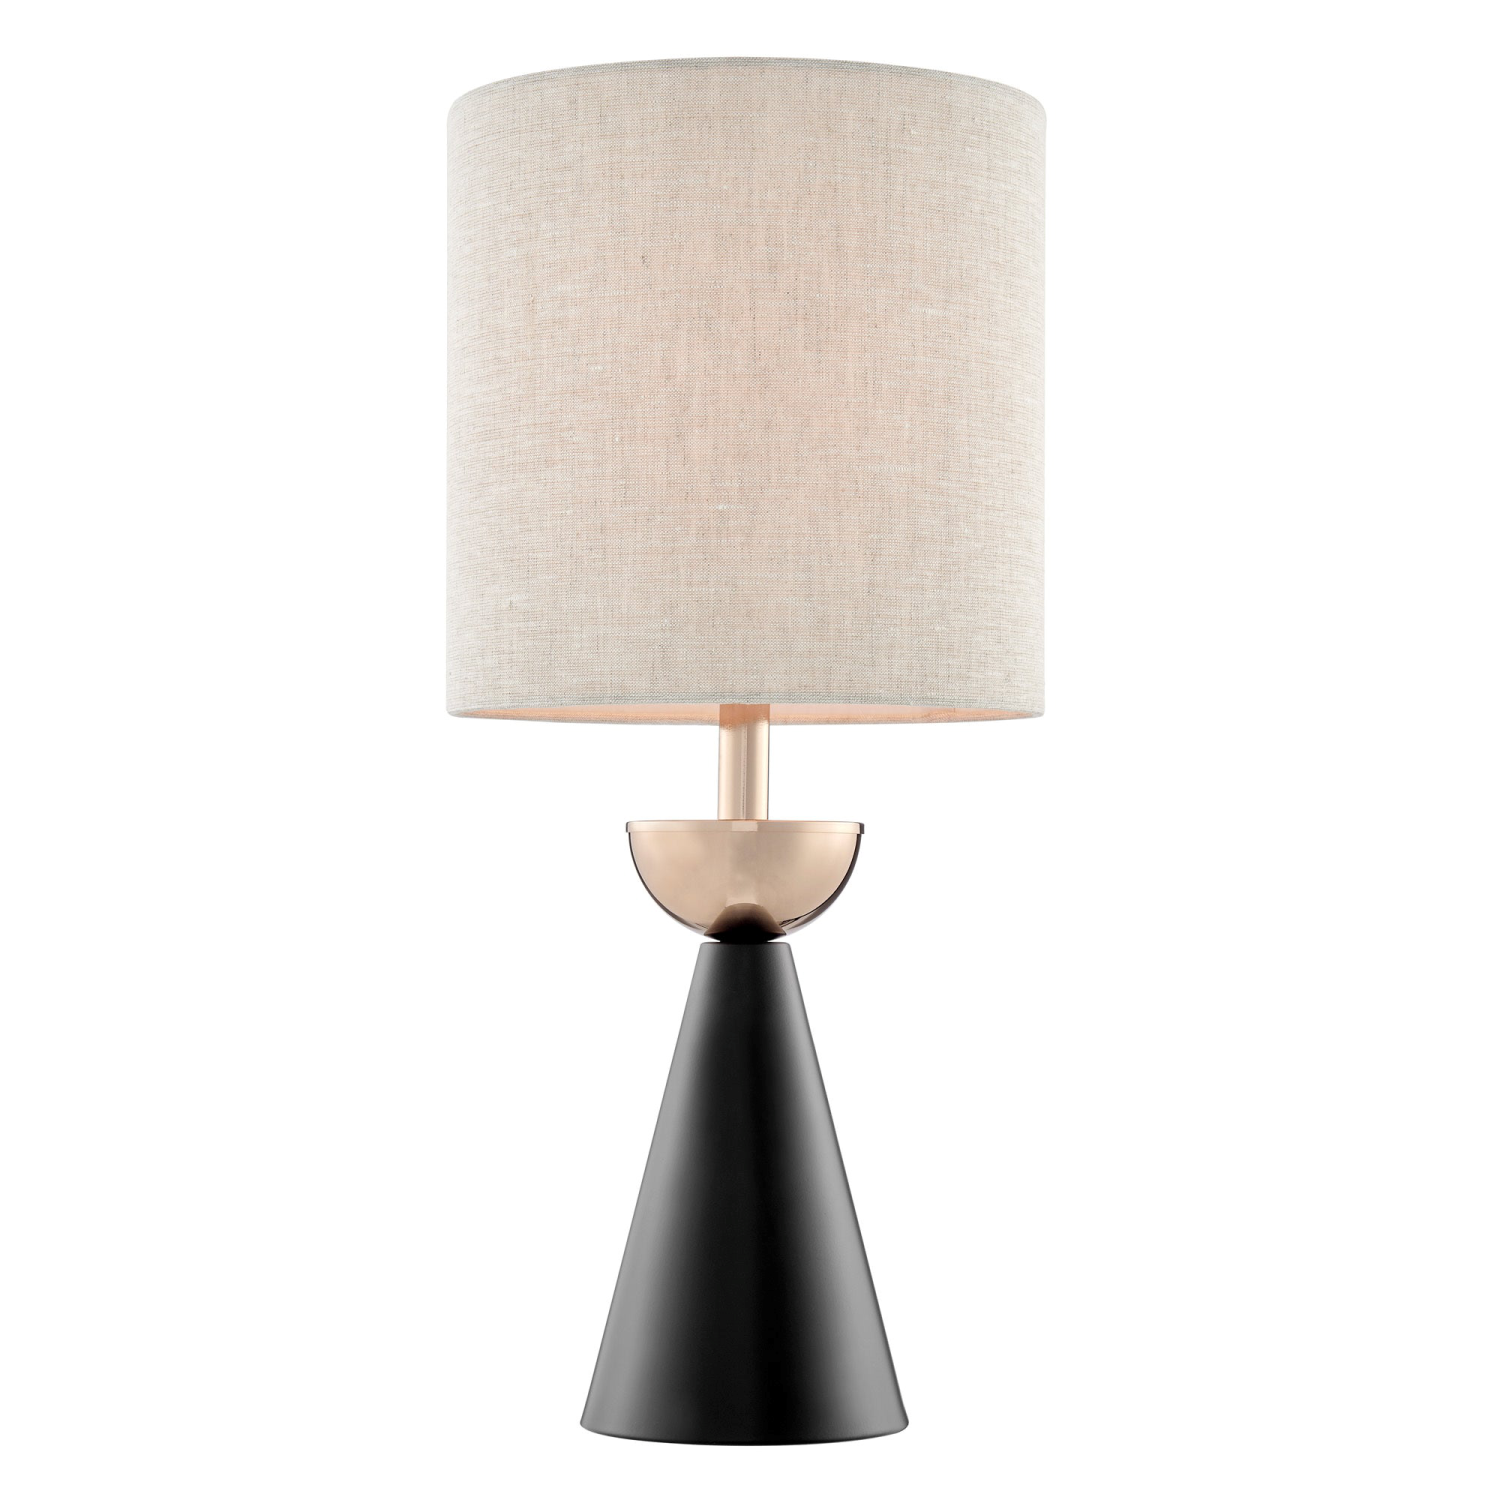 Oriela Table Lamp Picture with White Background